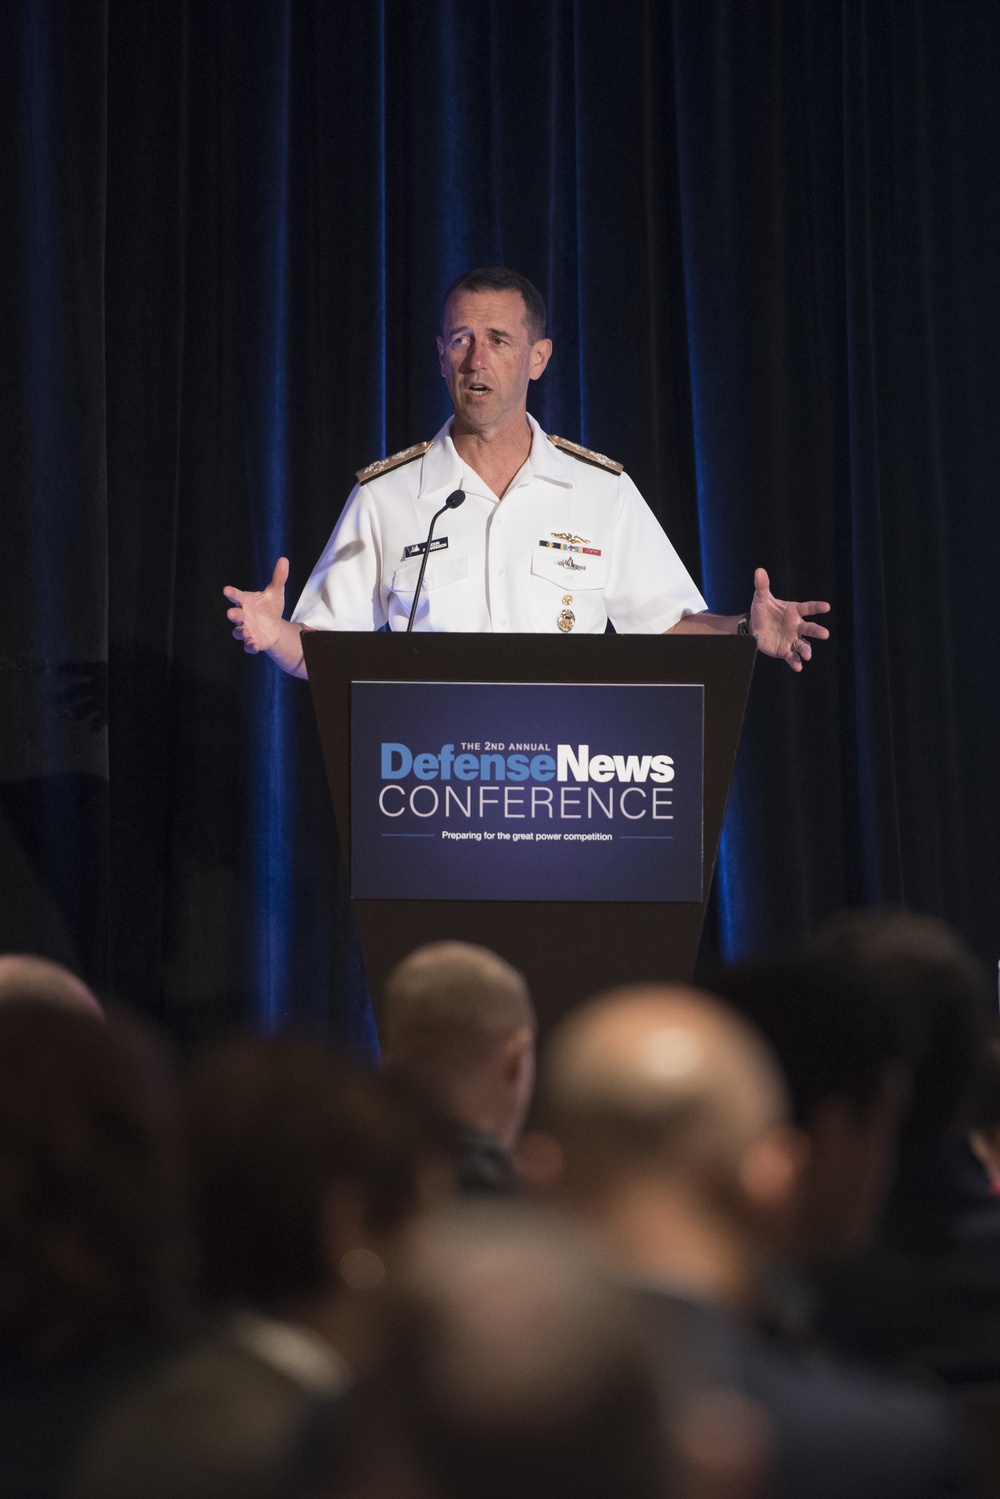 CNO delivers remarks at the 2nd annual Defense News Conference.